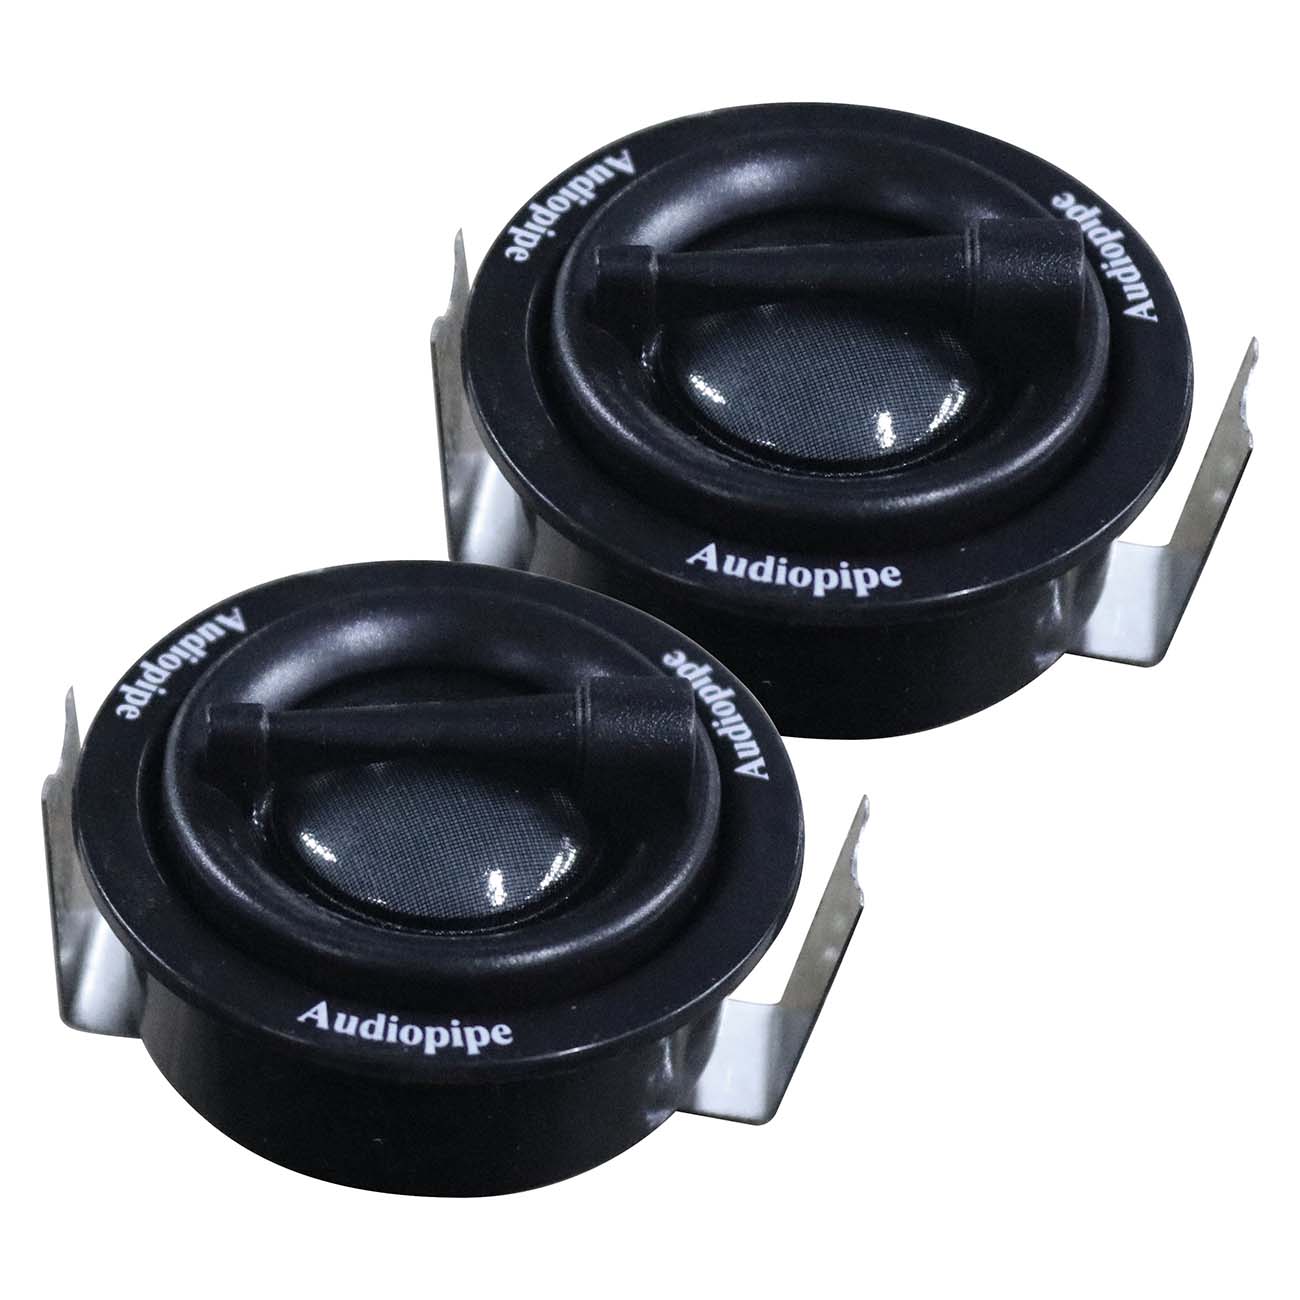 Audiopipe Soft Dome 3/4" Tweeters (sold In Pairs) 100watts Max